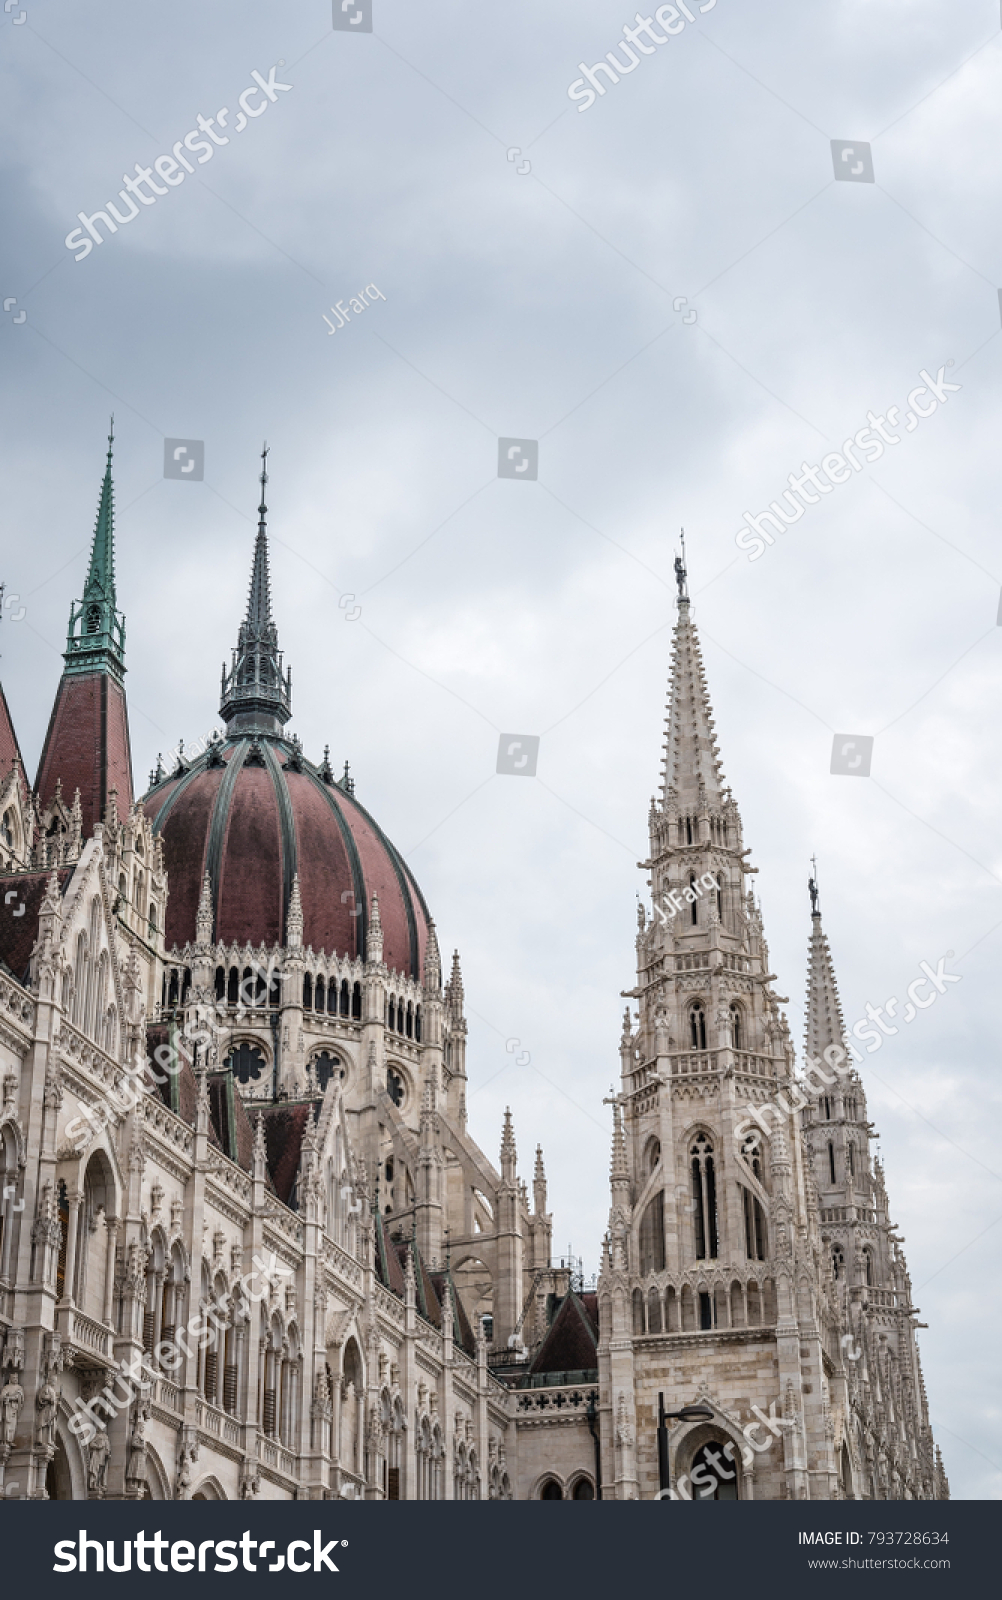 Budapest, Hungary - August 13, 2017: Outdoors view of Hungarian Parliament Building. It is the seat the National Assembly of Hungary #793728634